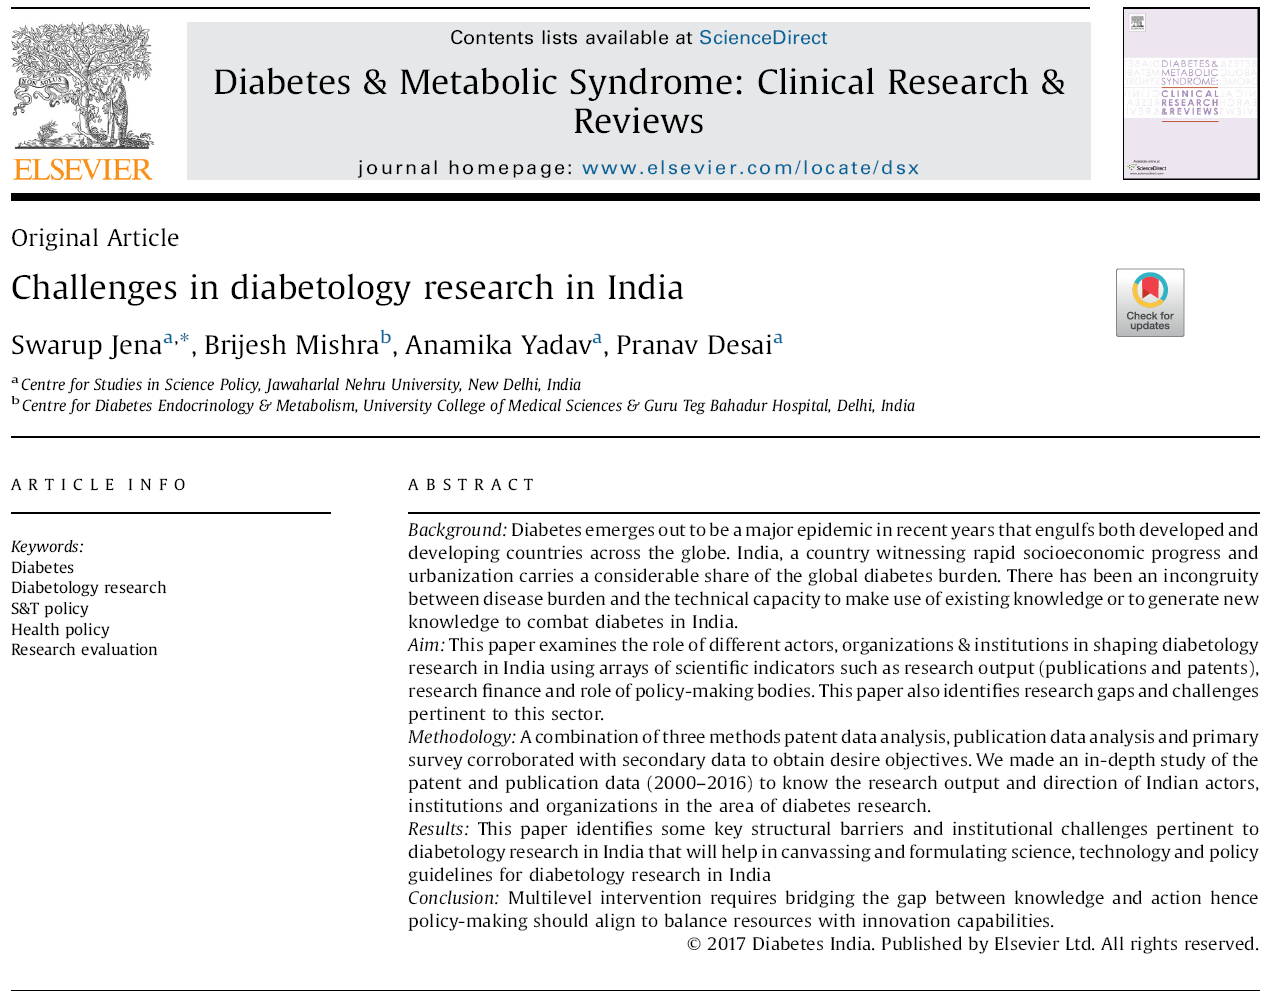 diabetes & metabolic syndrome: clinical research & reviews)